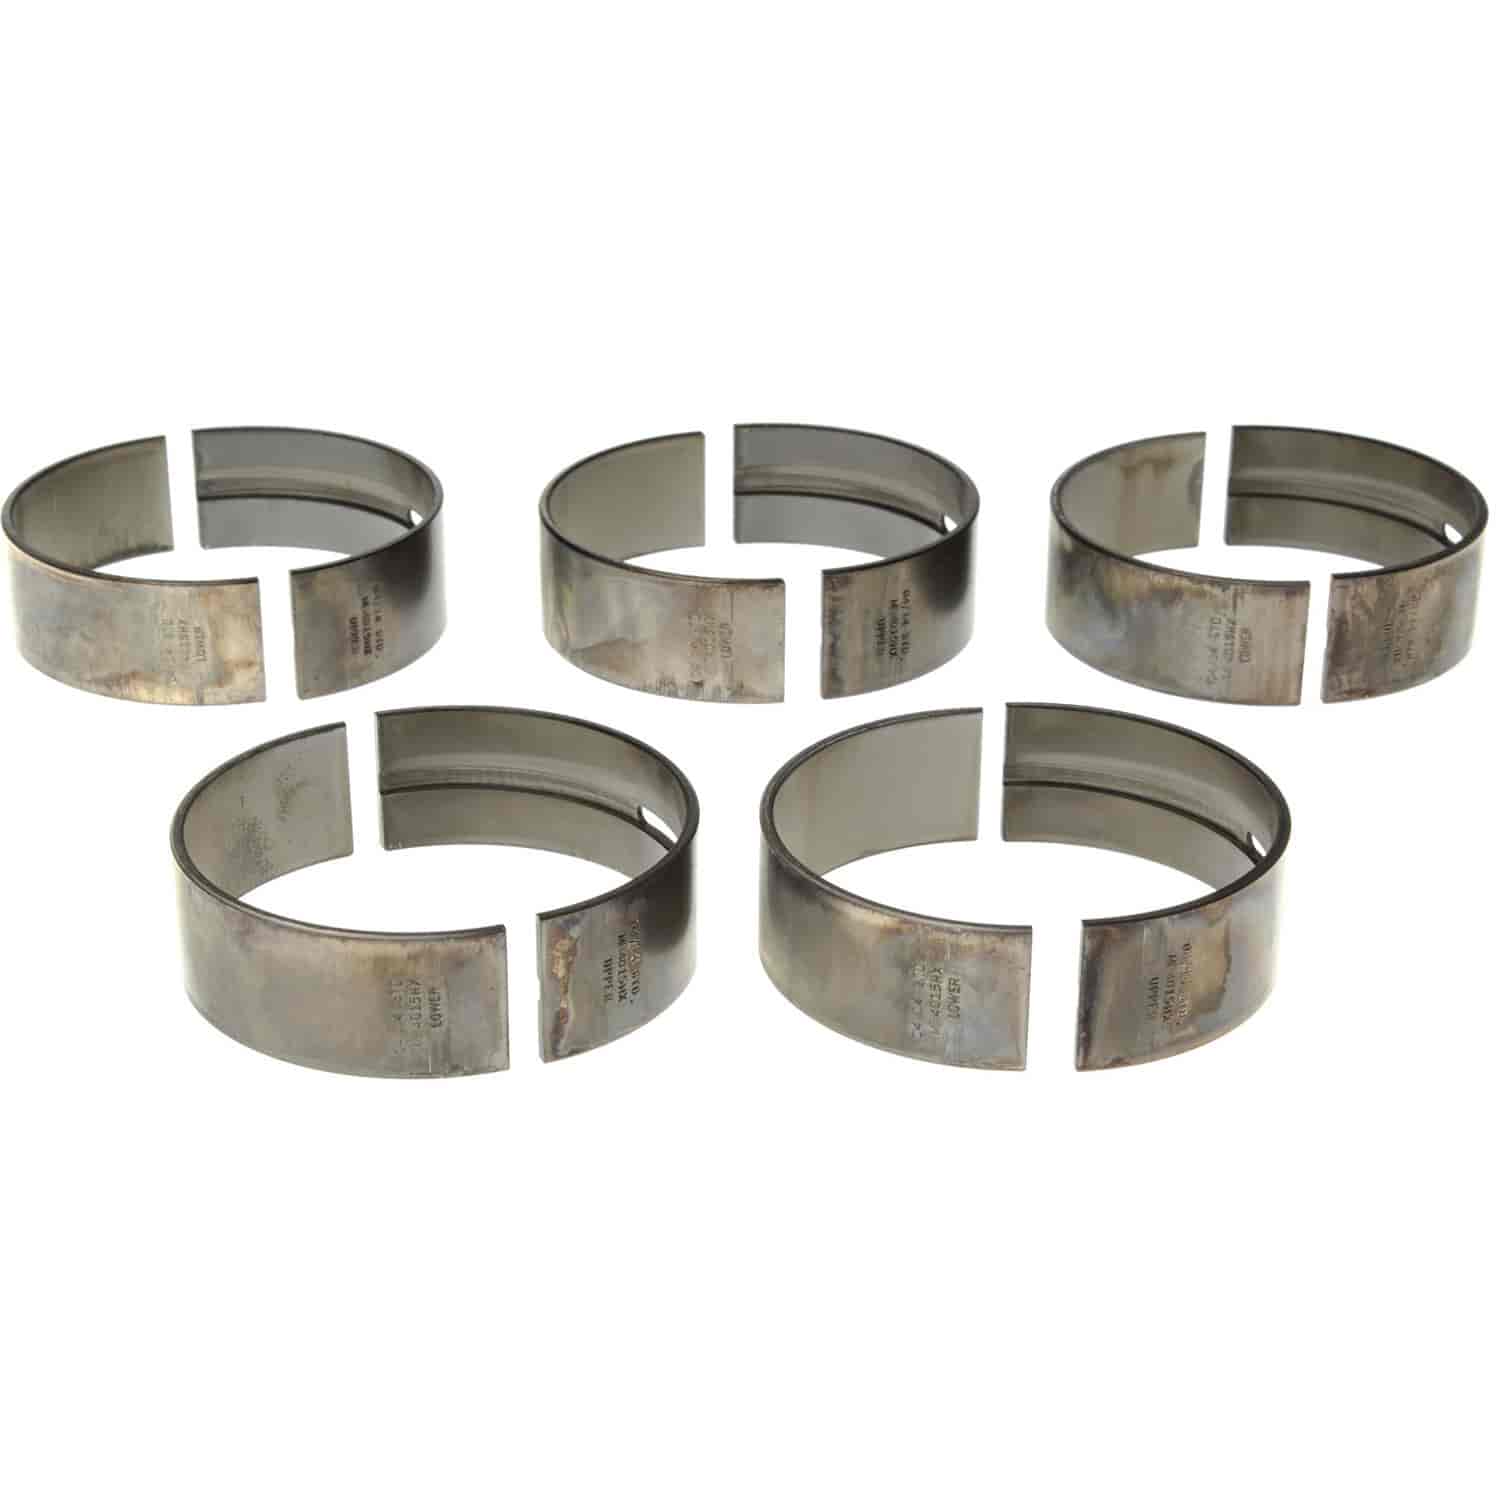 Main Bearing Set Ford 2011-2014 V8 6.7L Powerstroke Diesel with Standard Size